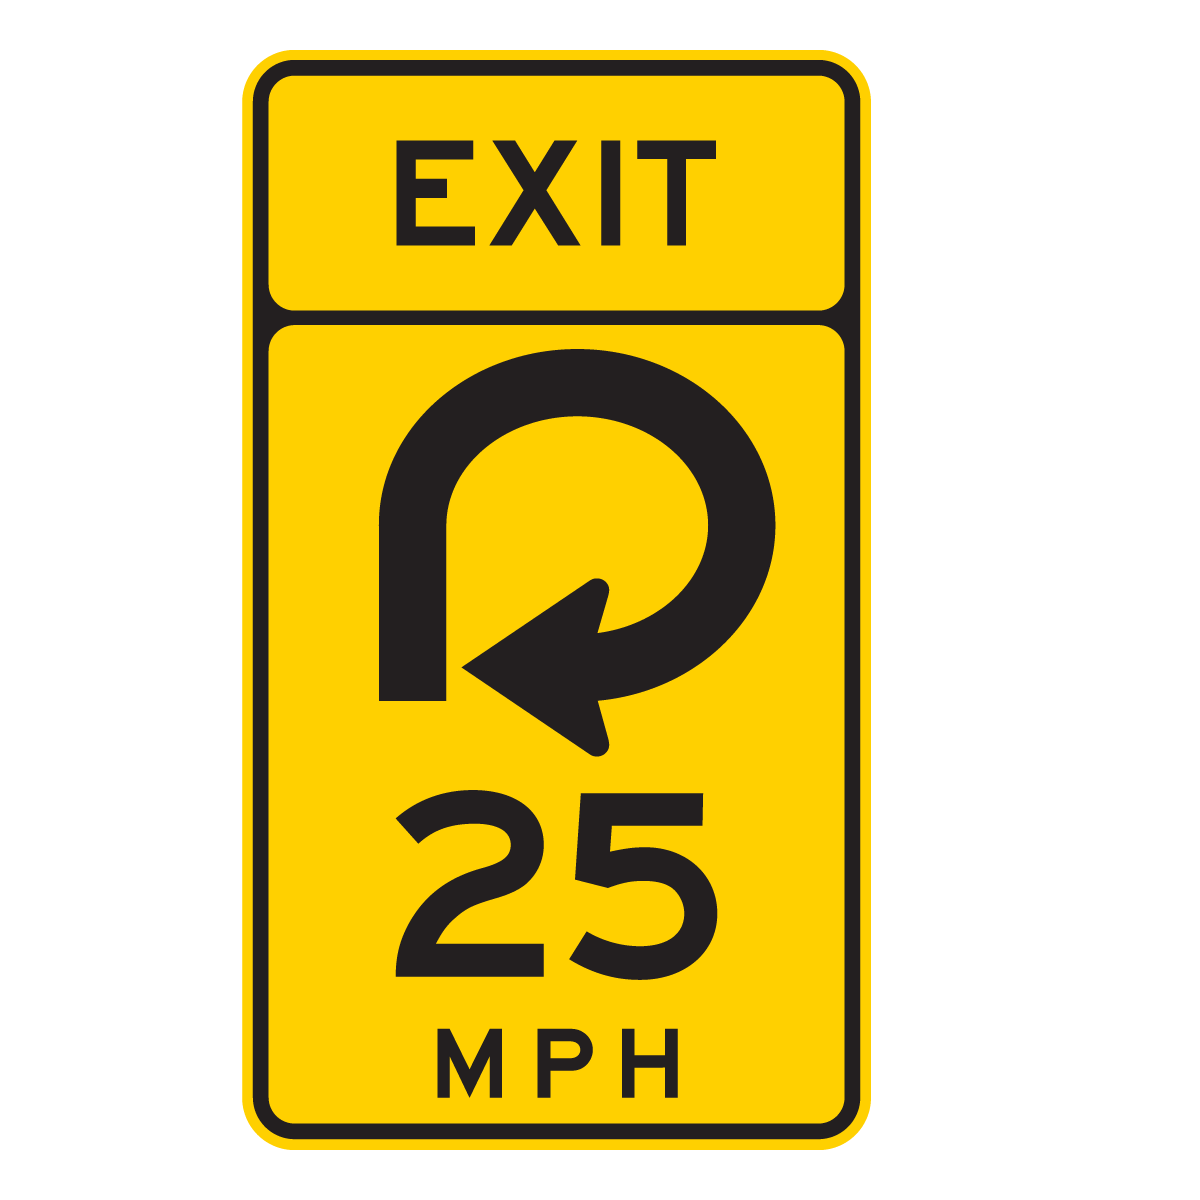 W13-6 Combination Loop Curve / Exit Speed